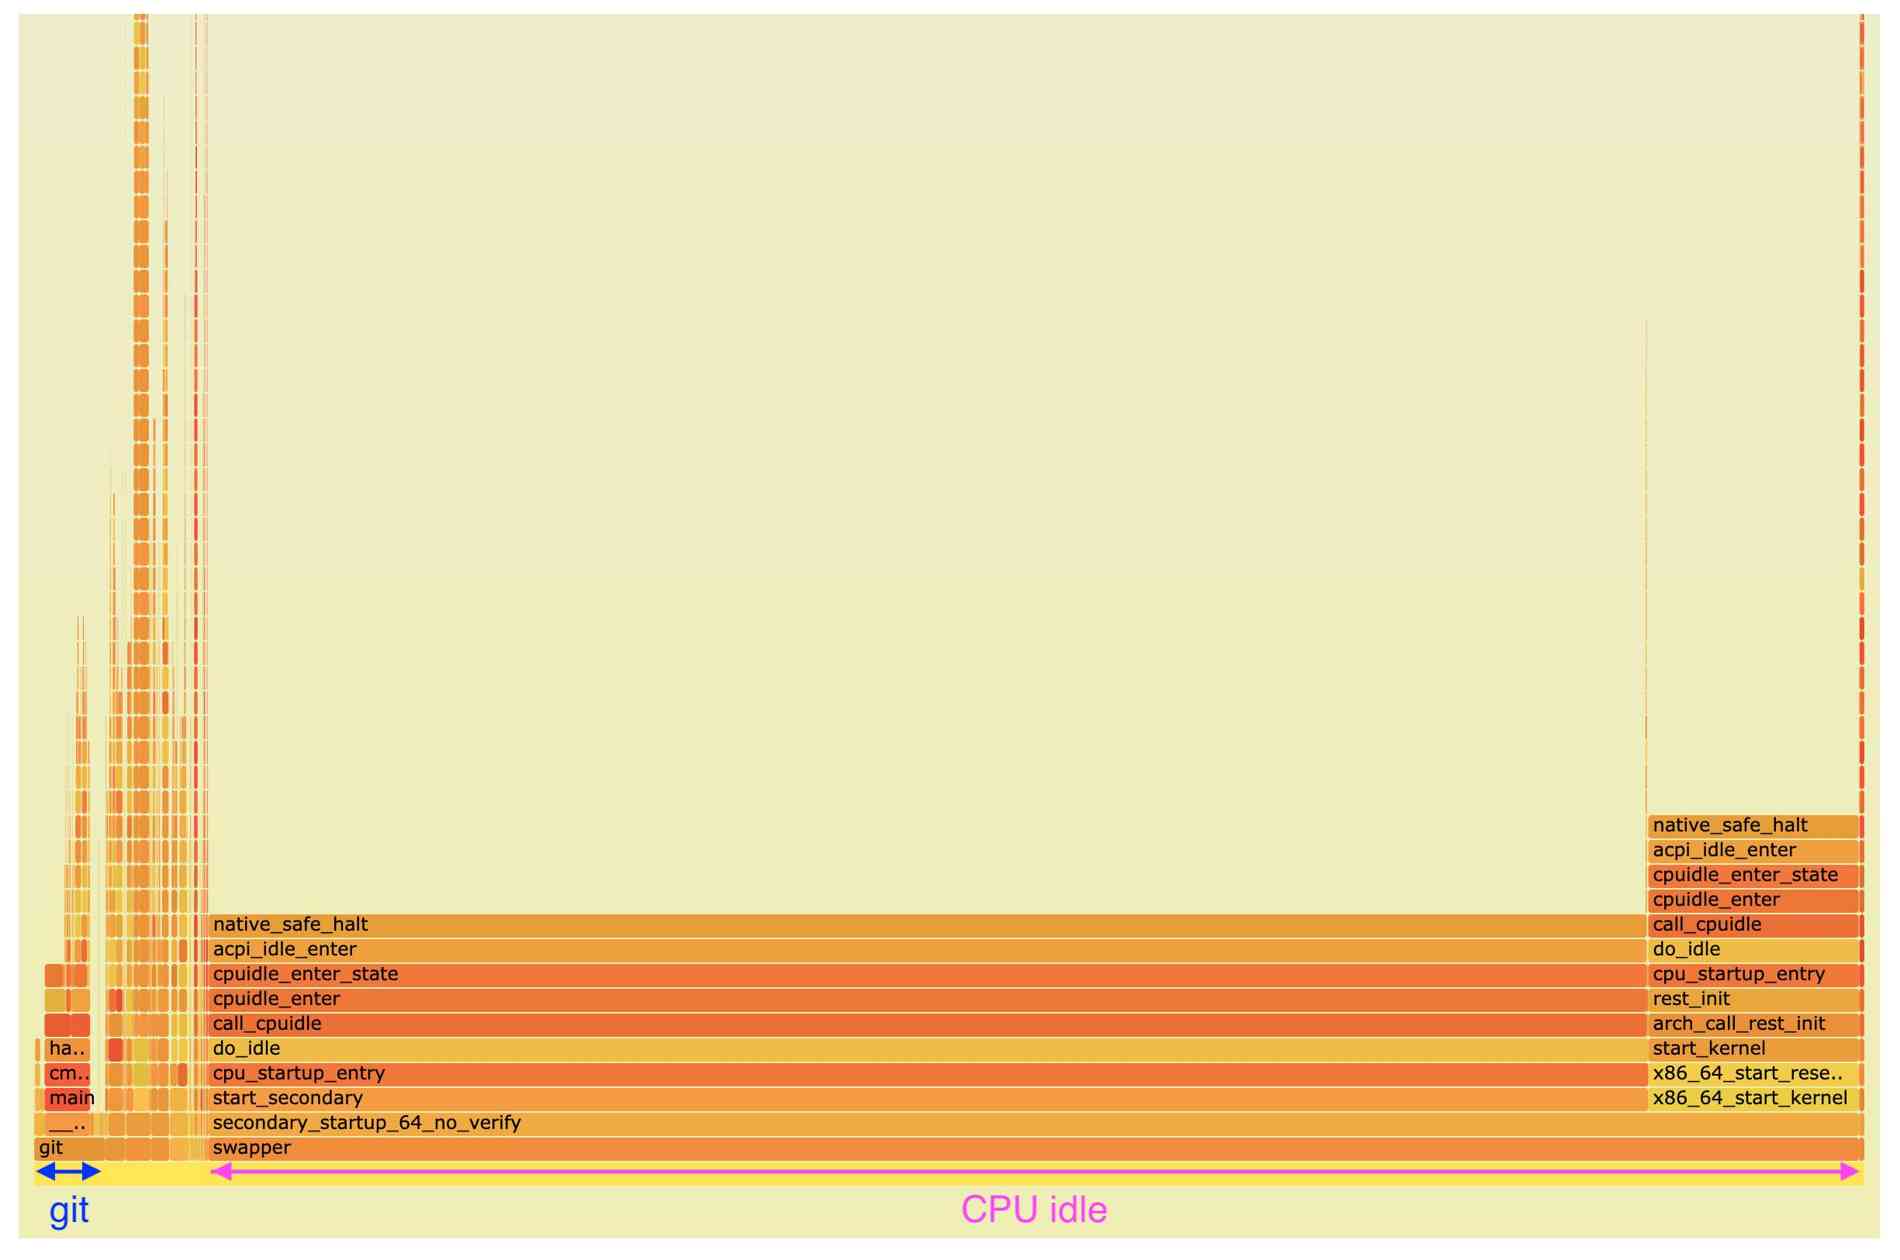 Flamegraph of GitLab 14.6 performance withcache